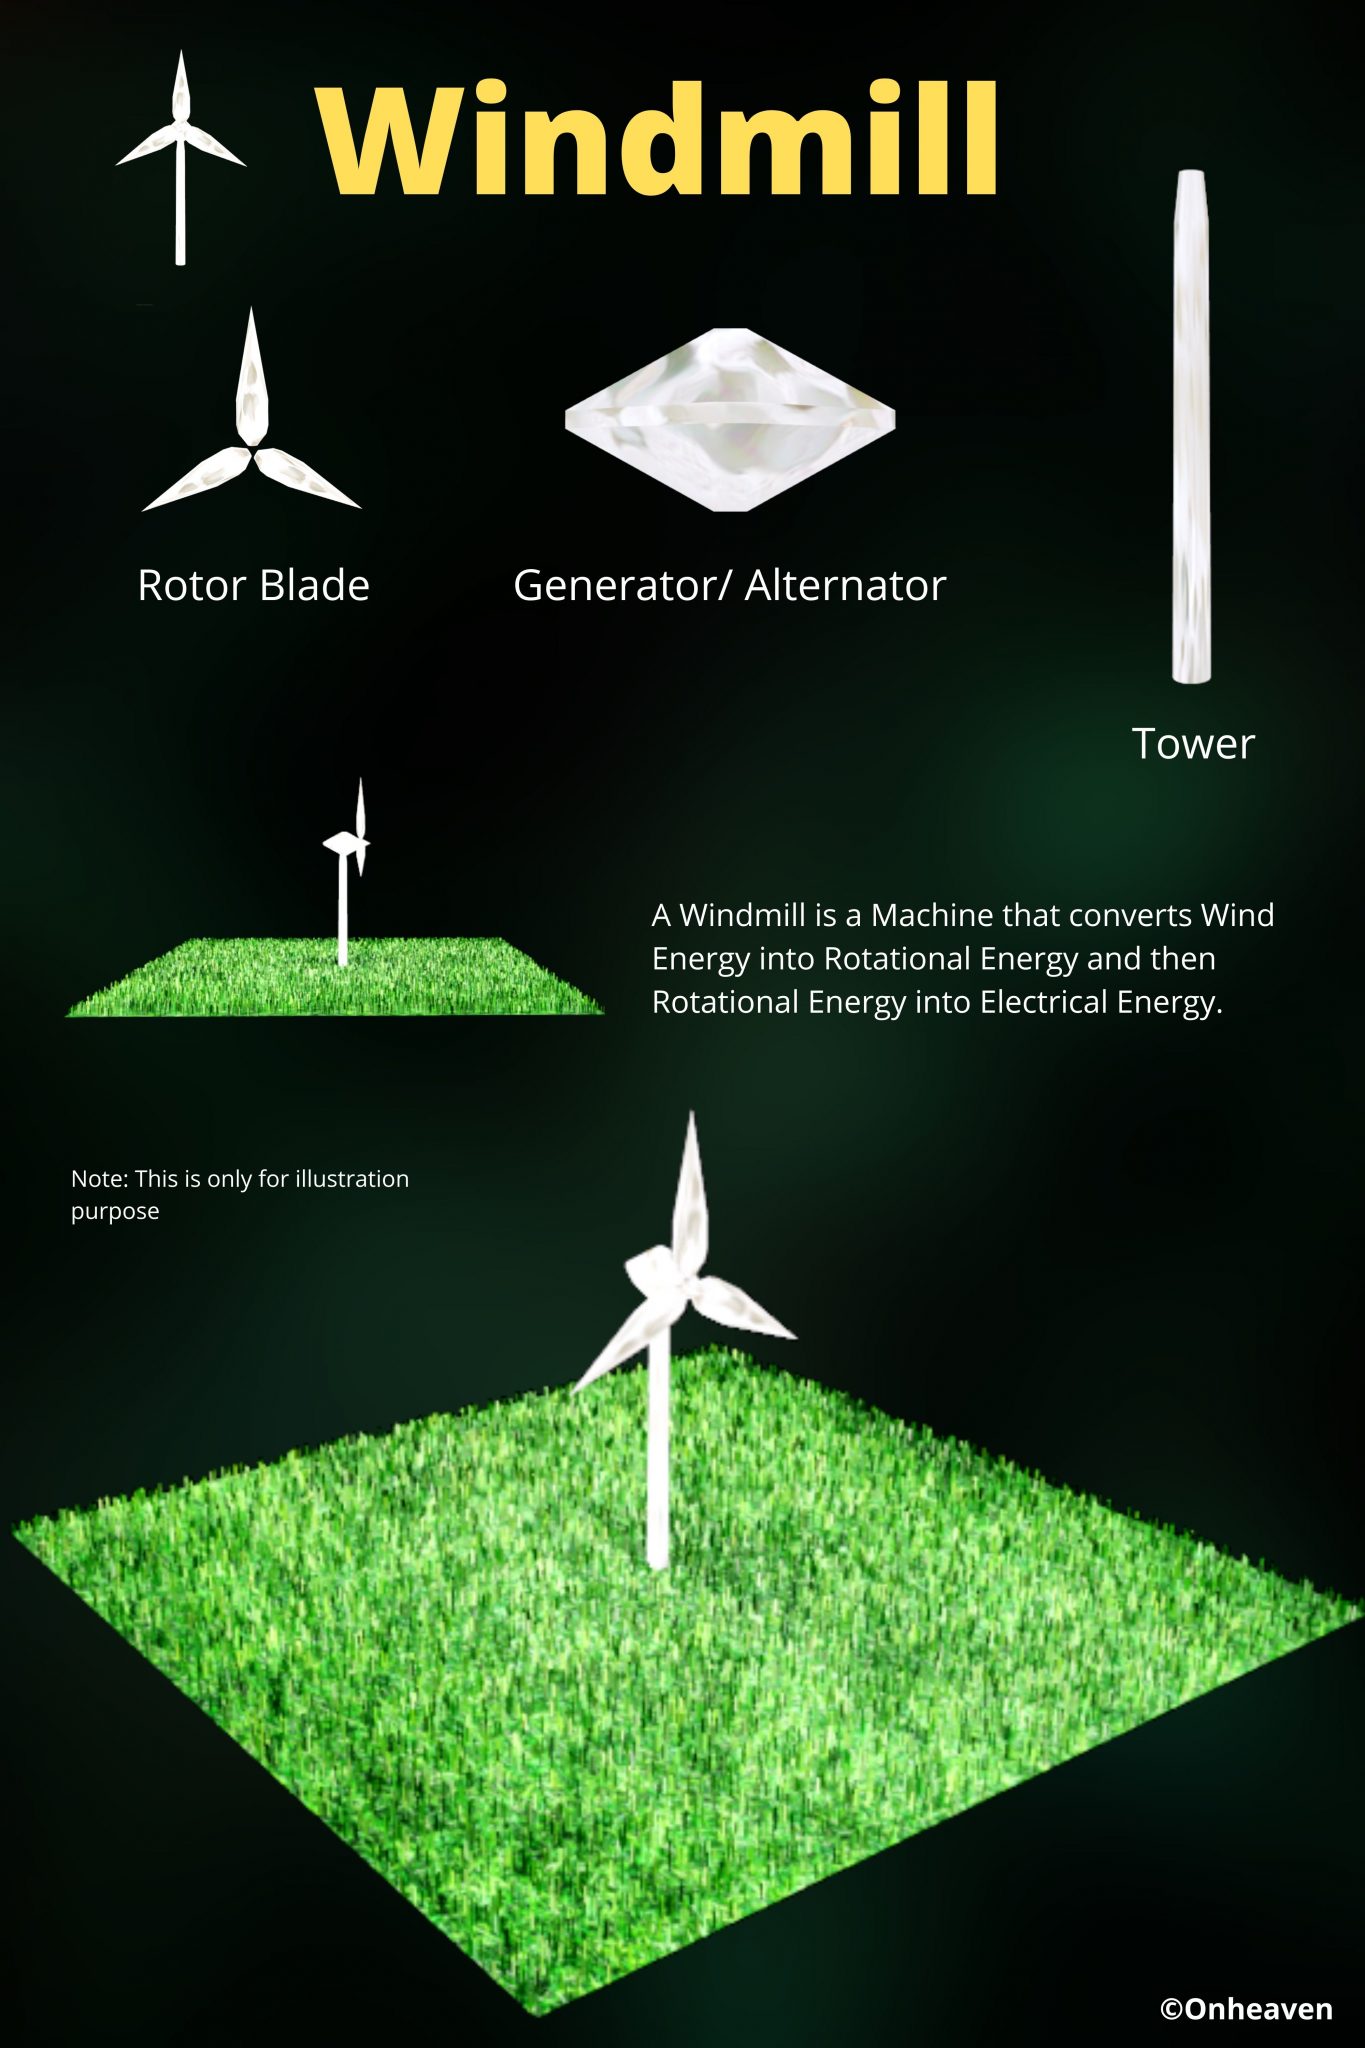 A Windmill is a Machine that converts Wind Energy into Rotational Energy and then Rotational Energy into Electrical Energy.